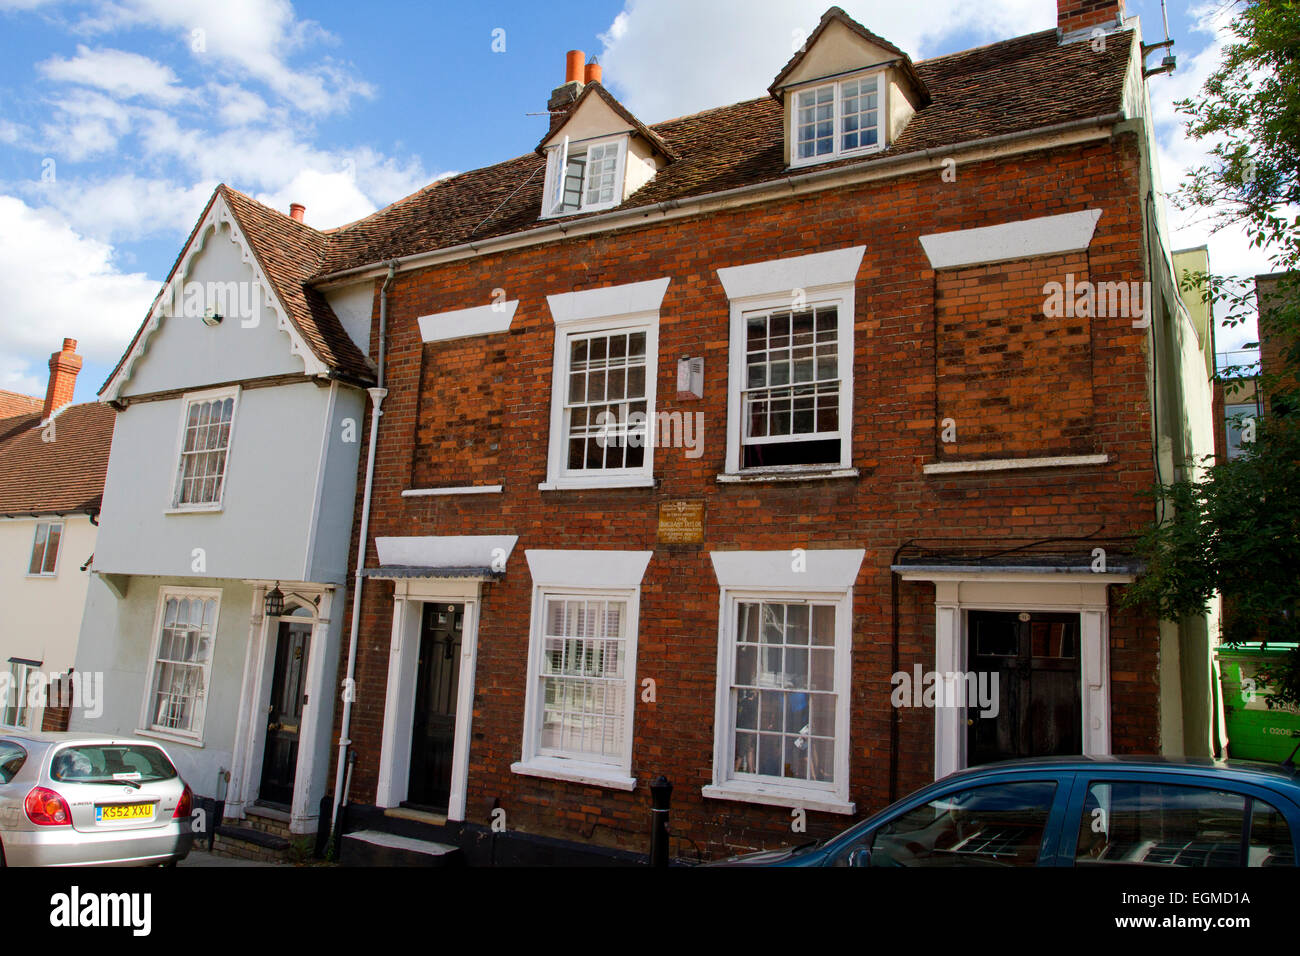 Home of poet Jane Taylor who wrote Twinkle Twinkle Little Star and her sister Ann Taylor in Colchester, Essex, England Stock Photo